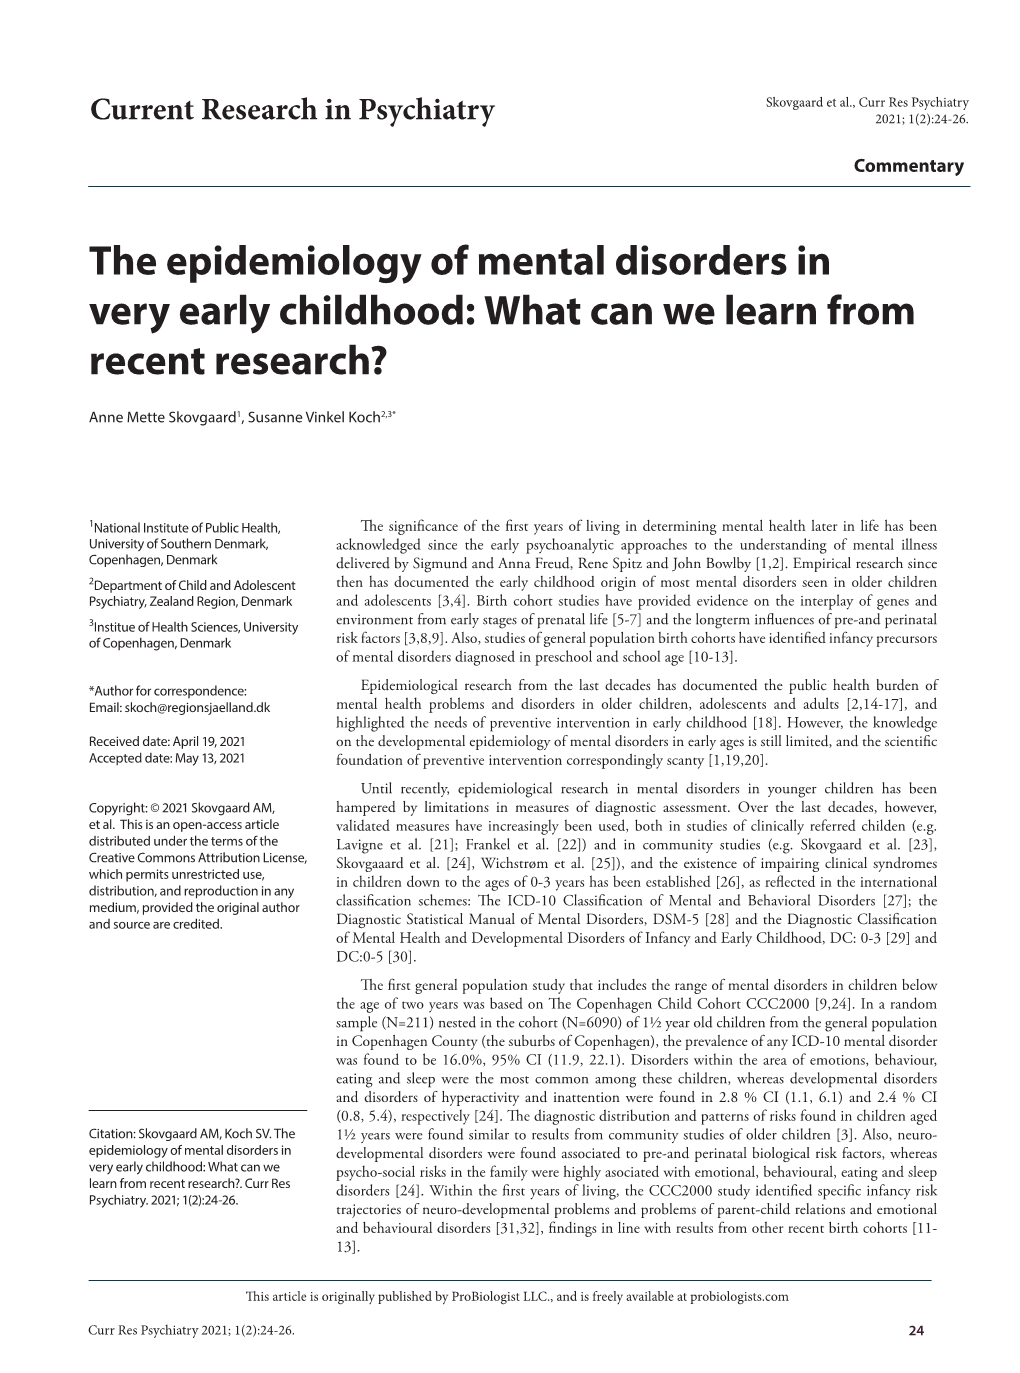 The Epidemiology of Mental Disorders in Very Early Childhood: What Can We Learn from Recent Research?